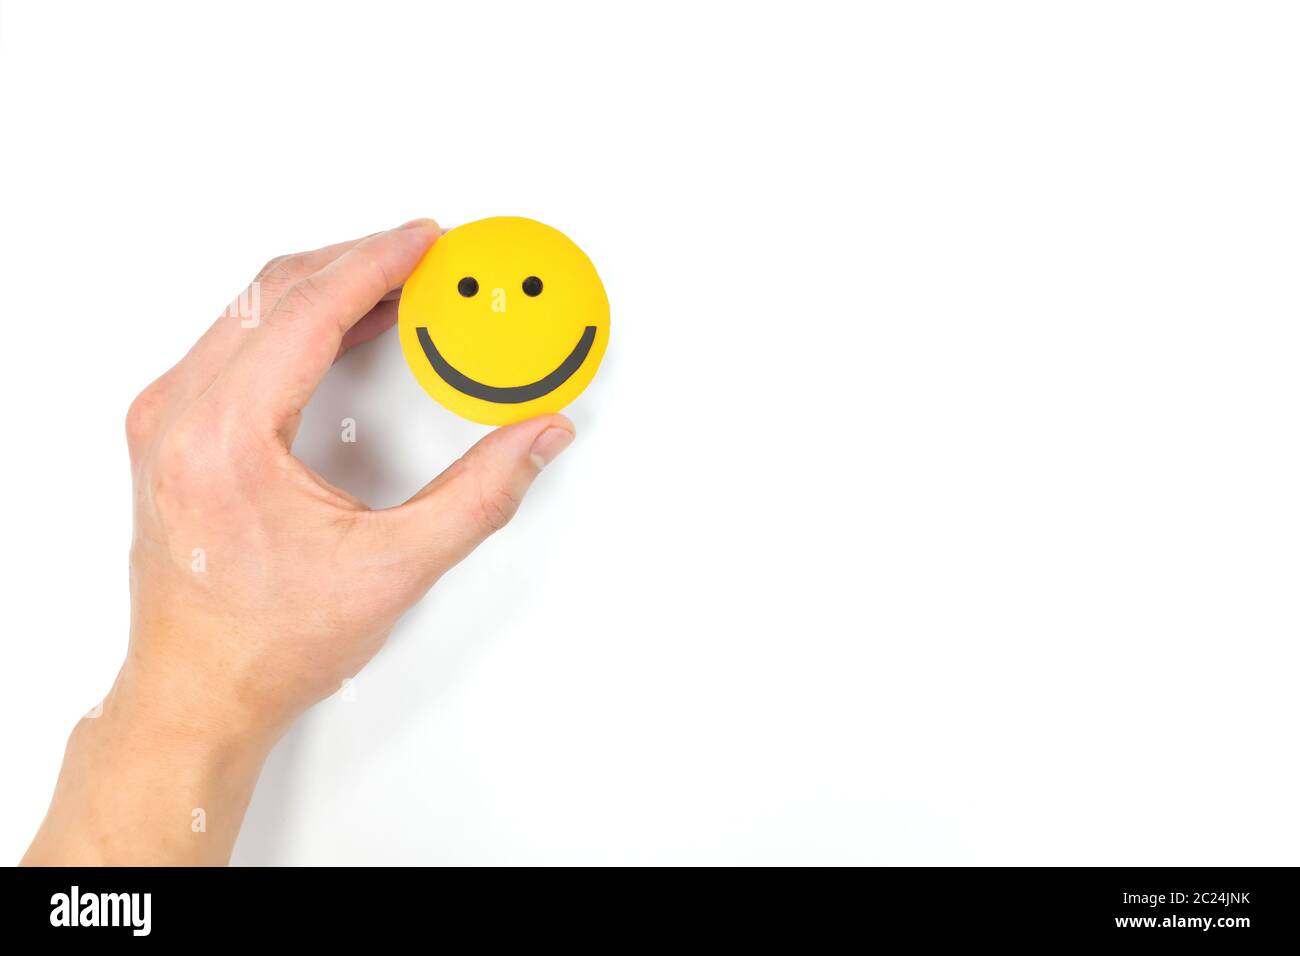 Happiness and positivity concept. Hand holding yellow smiling face in white background with copy space. Stock Photo